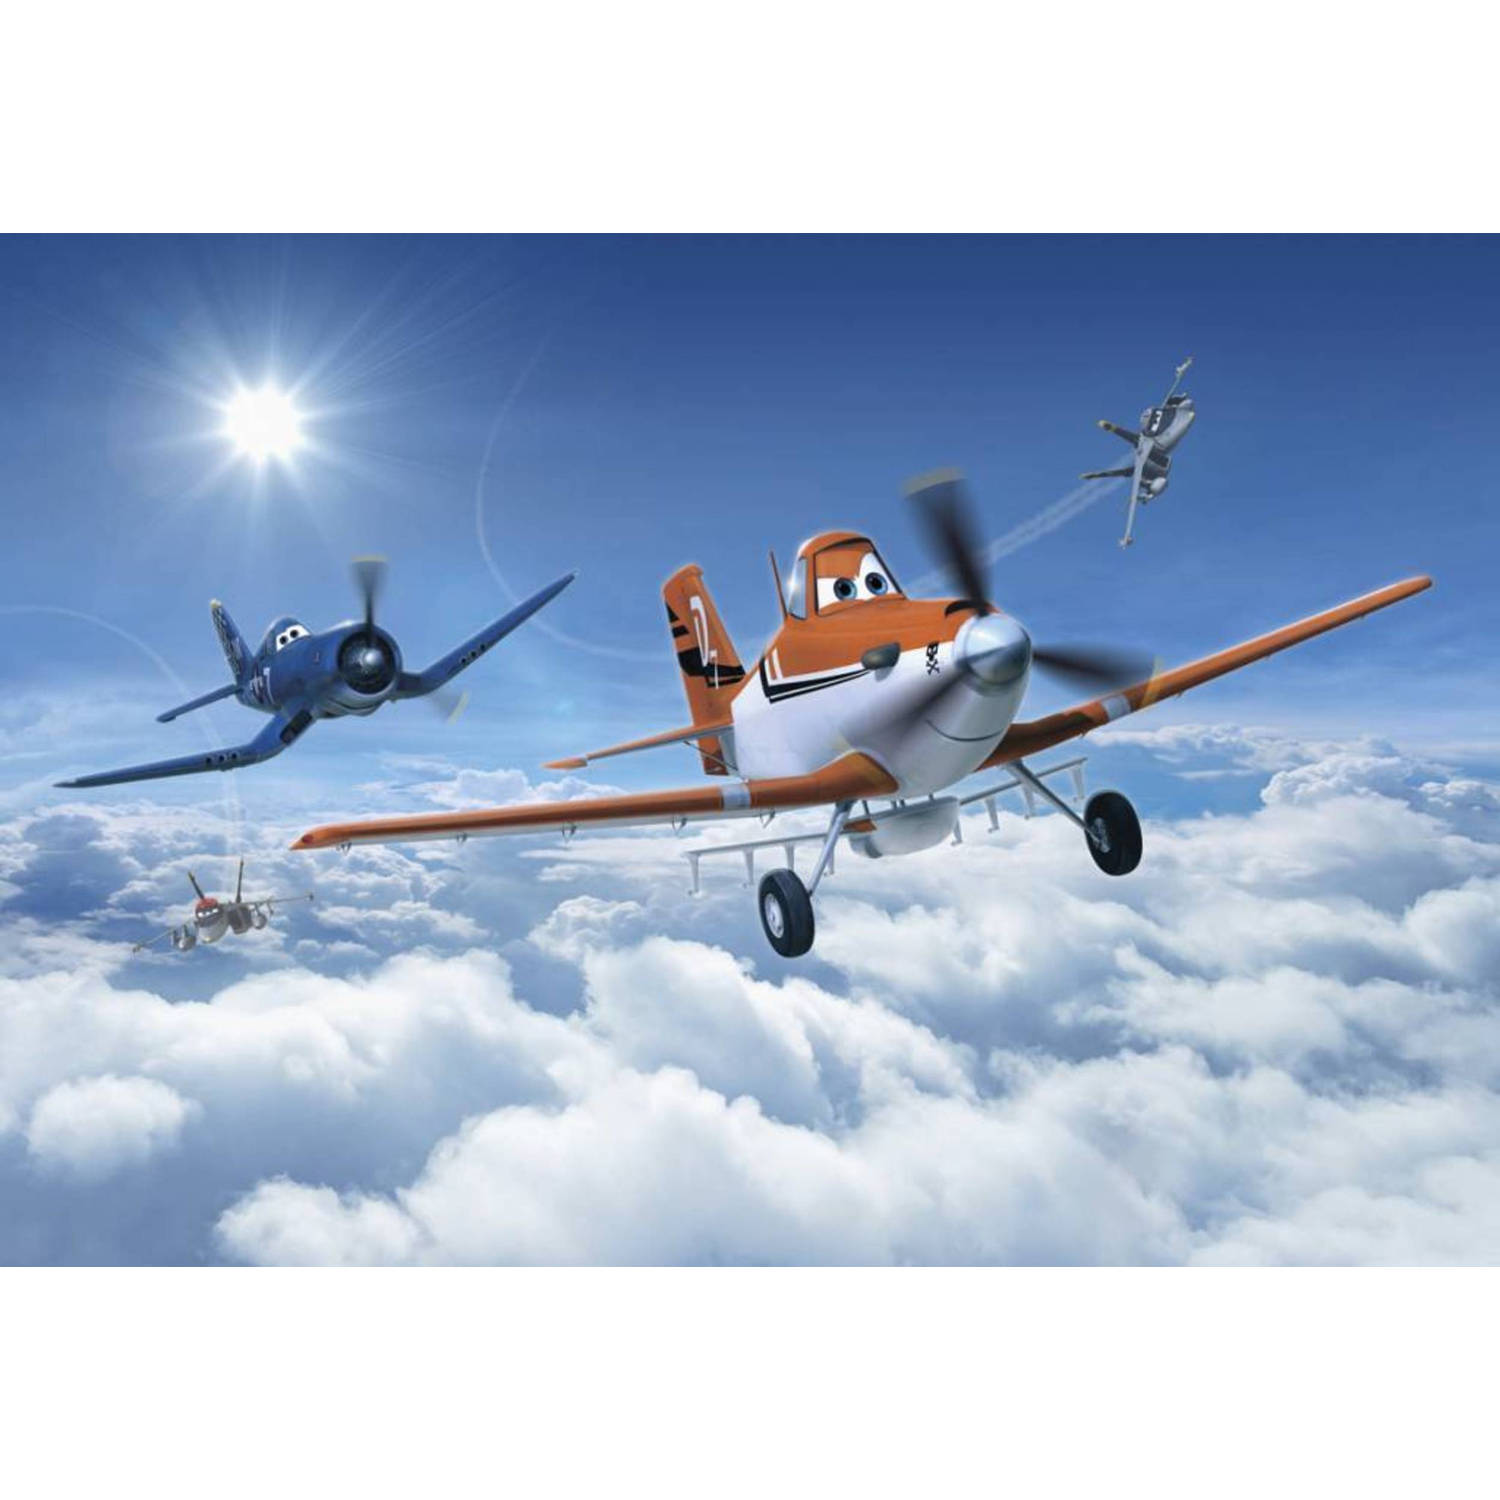 Disney Planes Above the Clouds